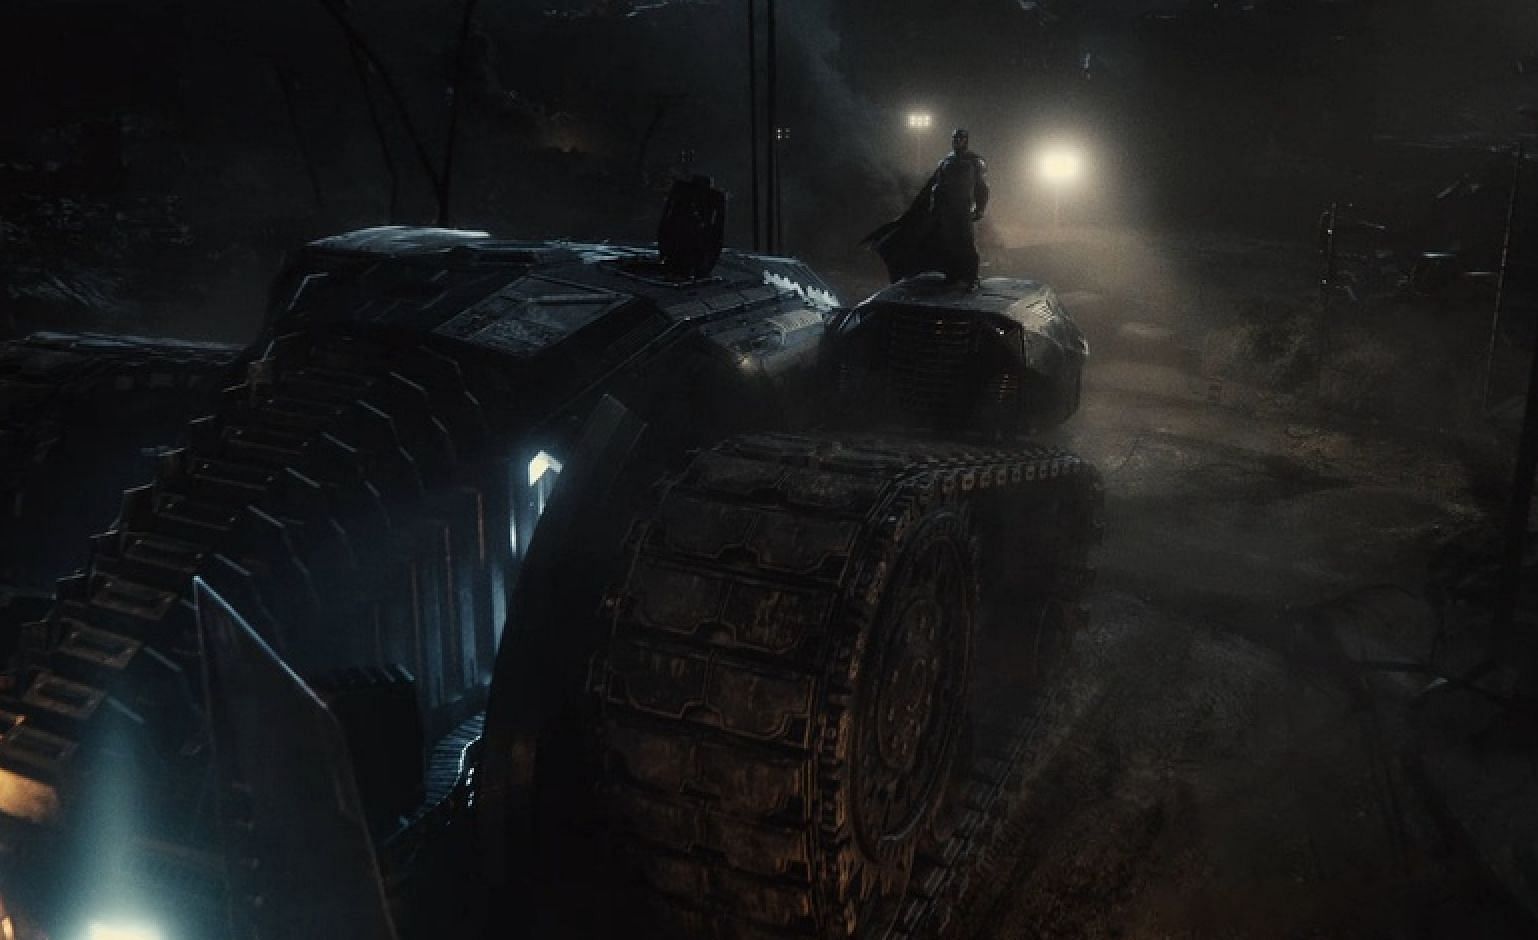 A heavily armored and weaponized version of the Batmobile, used to confront heavily armed criminals and villains (Image via Warner Bros)